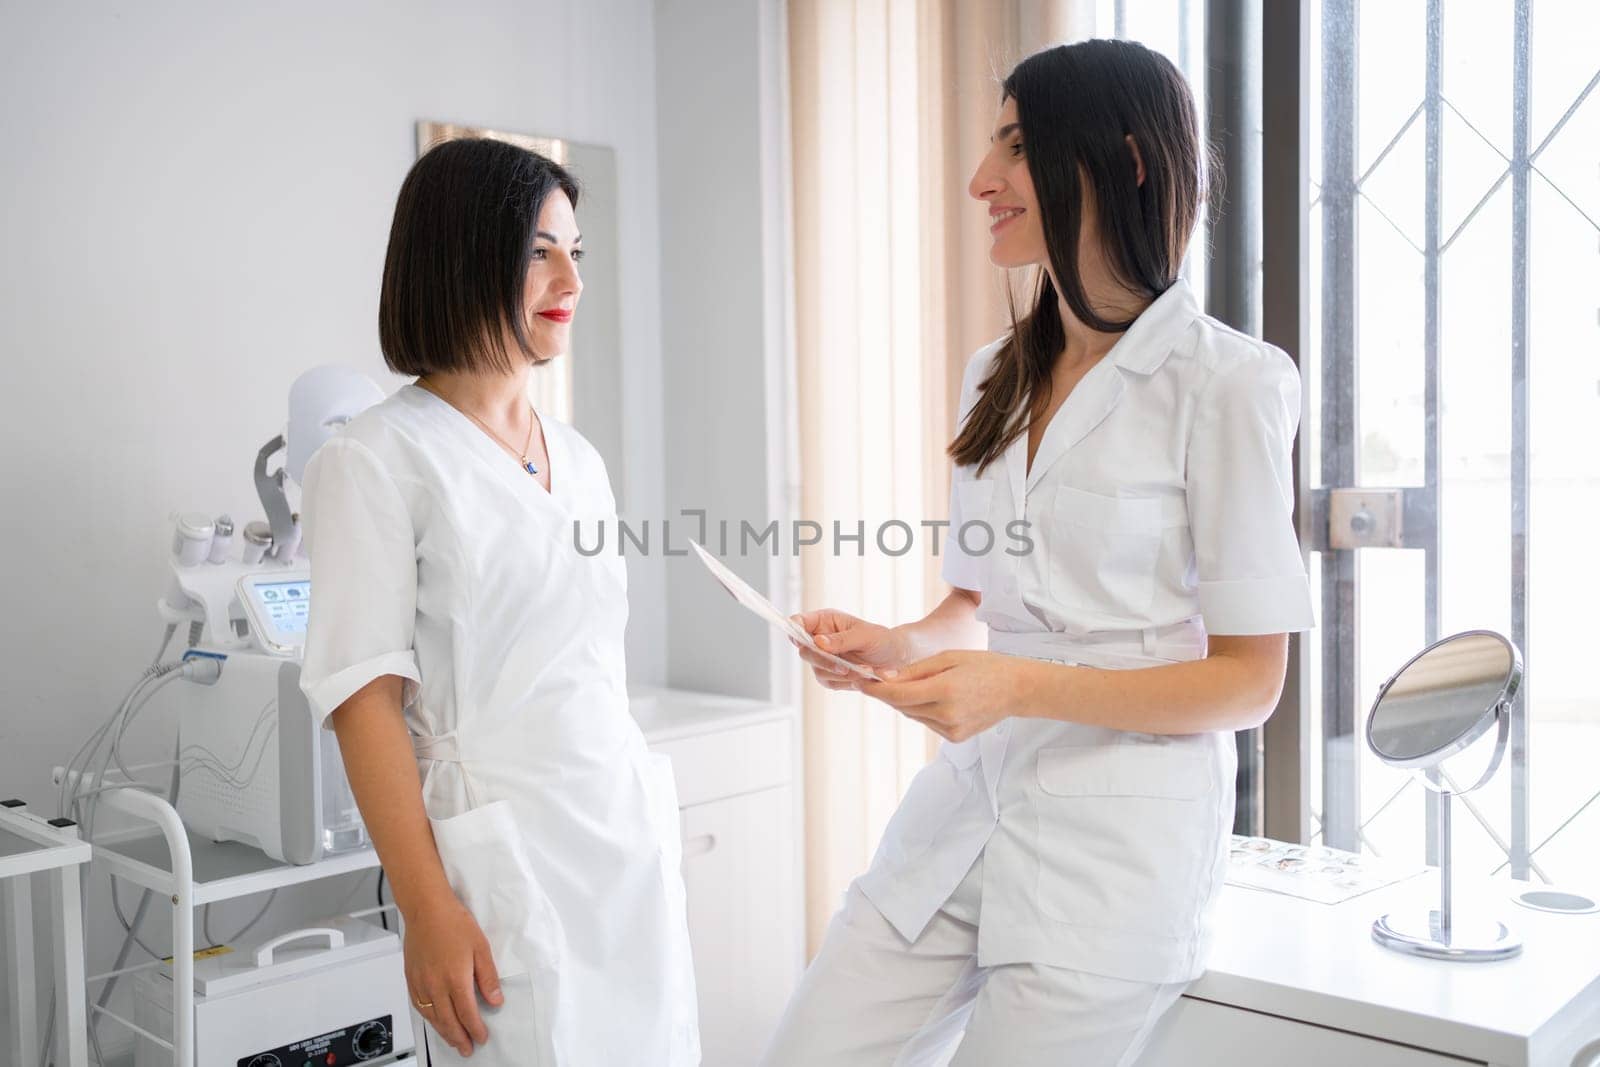 Two female doctors standing in medical clinic, discussing results of patient's exams. looking at each other and smiling. Healthcare specialists are having a professional conversation.